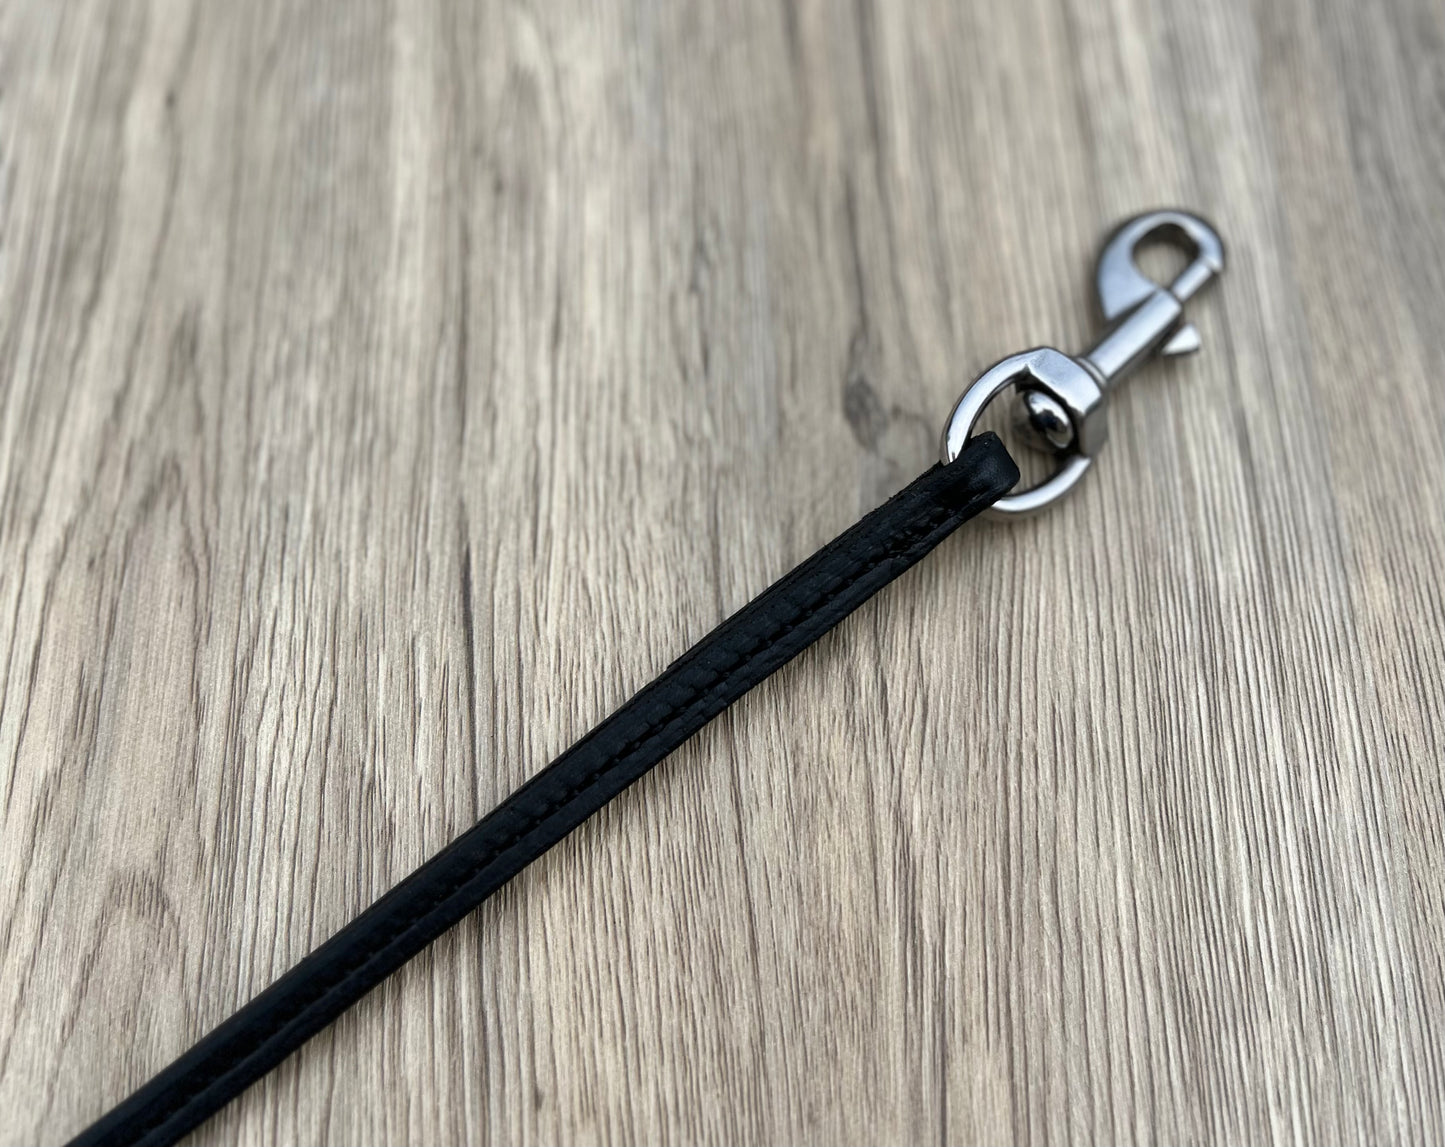 3/8" Top Grain Stitched Leather Leash